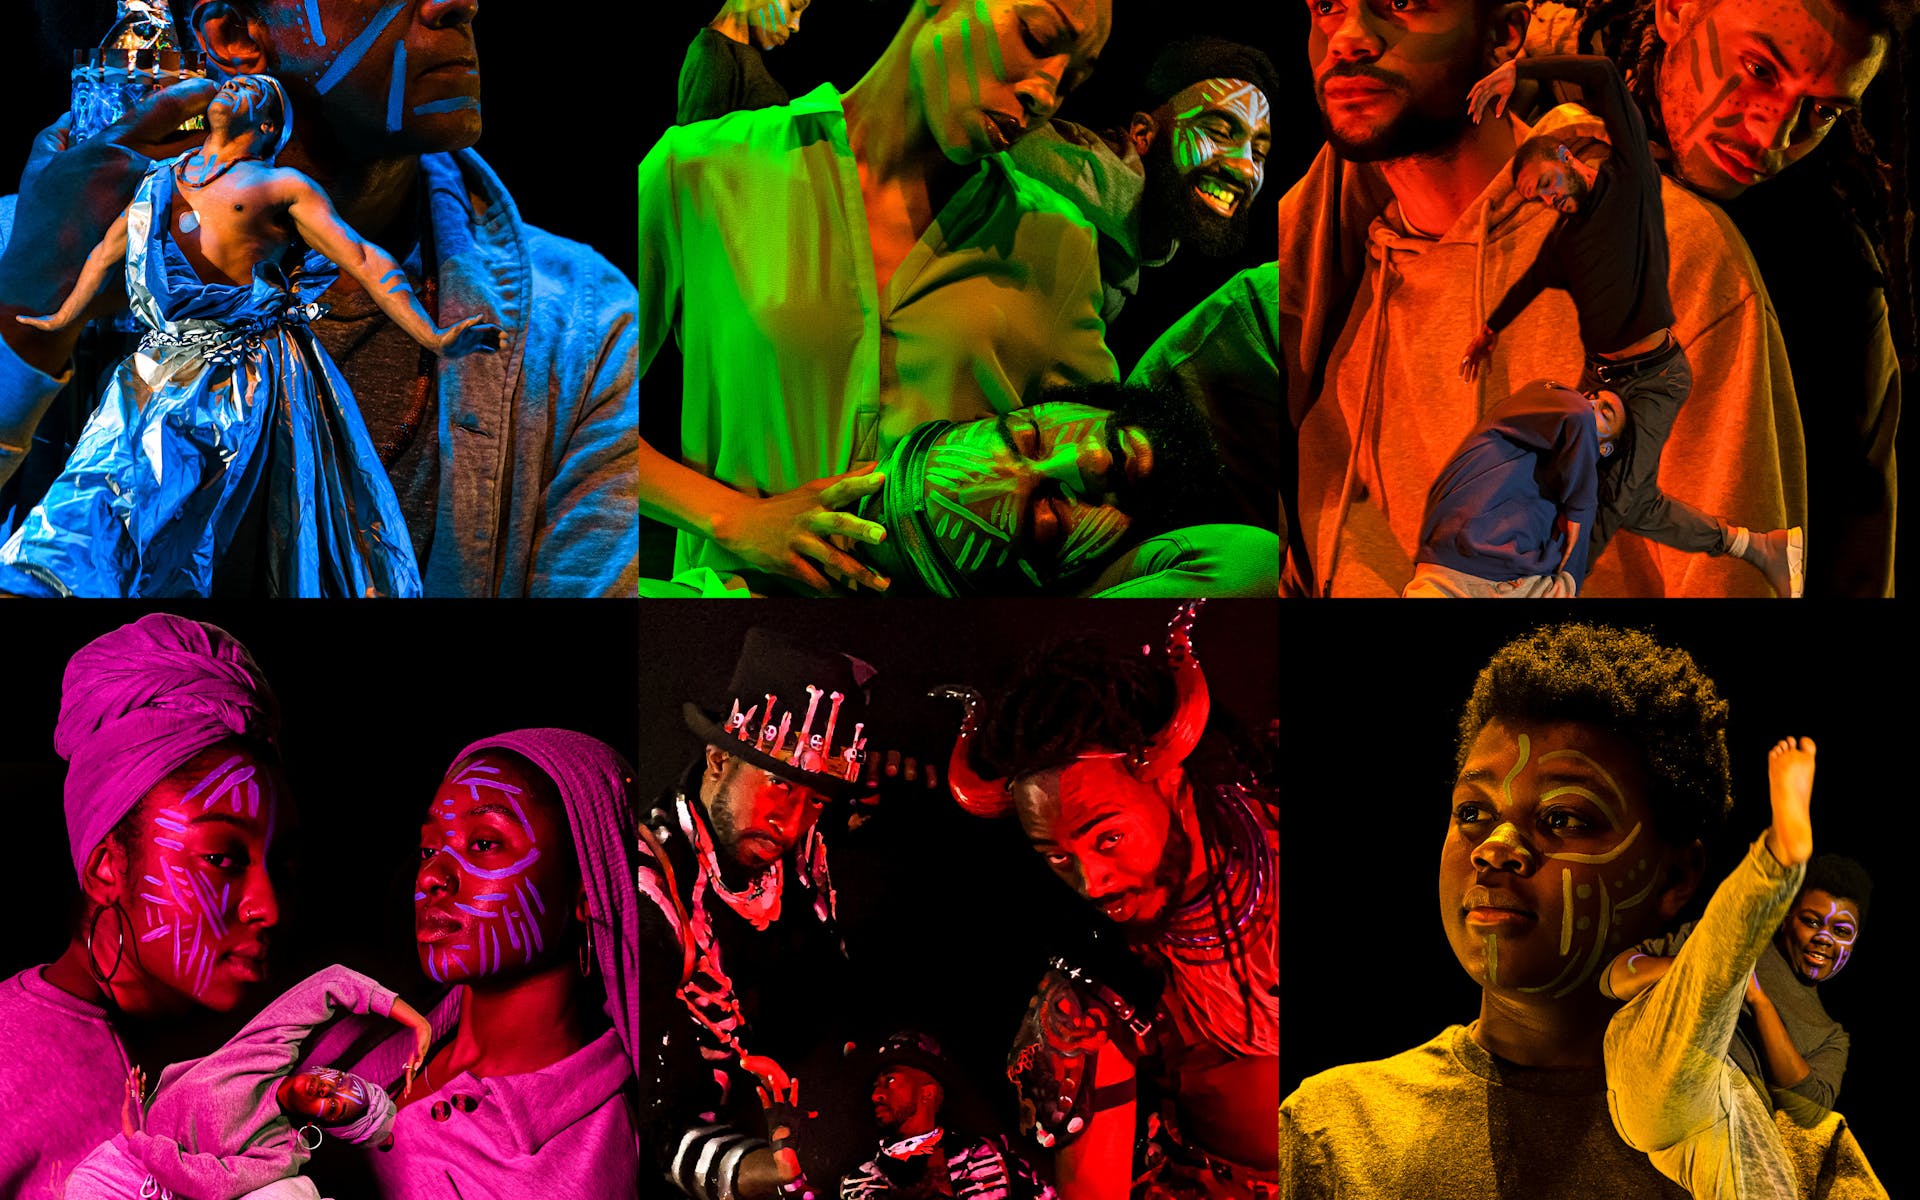 “A composite image features six portraits of Black dancers and choreographers, posed and in performance, each highlighted in a single color of blue, green, orange, pink, red, or yellow. The performers all have bold lines painted on their faces in the style of traditional African face painting. In the foreground of the blue portrait, a dancer in a billowing costume covering one shoulder looks toward the sky with arms outstretched above hip level, hands flexed; in the background, a dancer looks left in profile while holding up a lit candle that illuminates their painted face. In green, a seated dancer in a blouse cradles the head of another performer in their lap, tenderly leaning toward them. Bathed in orange light, a pair of dancers dressed in hoodies pose together, one rests their head on the other’s shoulder. In the foreground, one dancer leaps above the other, captured in movement. In the pink portrait, two dancers with scarves wrapped or draped on their heads stand next to each other; one looks at the camera in profile. In the foreground, they twist around each other, arms, legs, and bodies curving and in motion. In red, two bearded performers in embellished outfits, one wearing horns and the other a tall hat, reach out and lean in toward the camera. In yellow, a solo dancer in the foreground, dressed in a unitard, kicks up one leg toward the camera, leaning back with their bare foot flexed and extending above their head. In the background portrait, a dancer stands tall as light shines on their natural black hair and across one shoulder.”